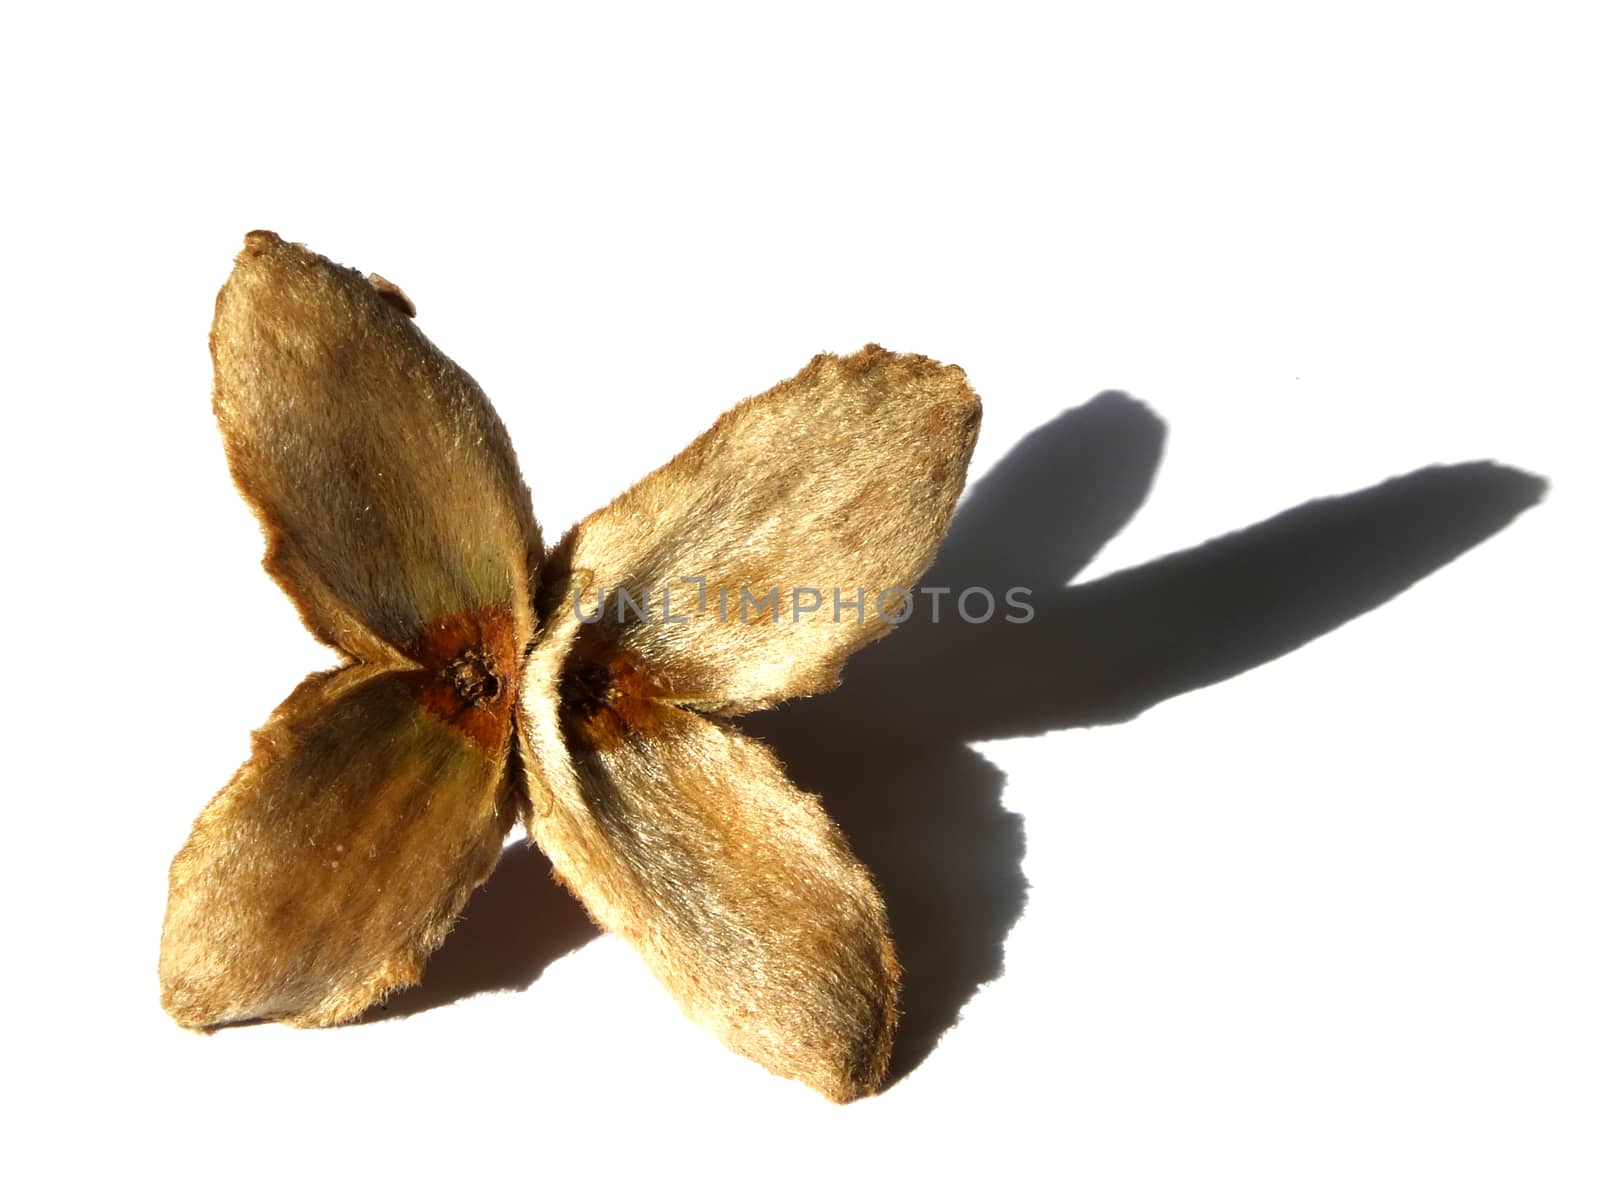 an open beech nut husk on a white background with shadow by philopenshaw